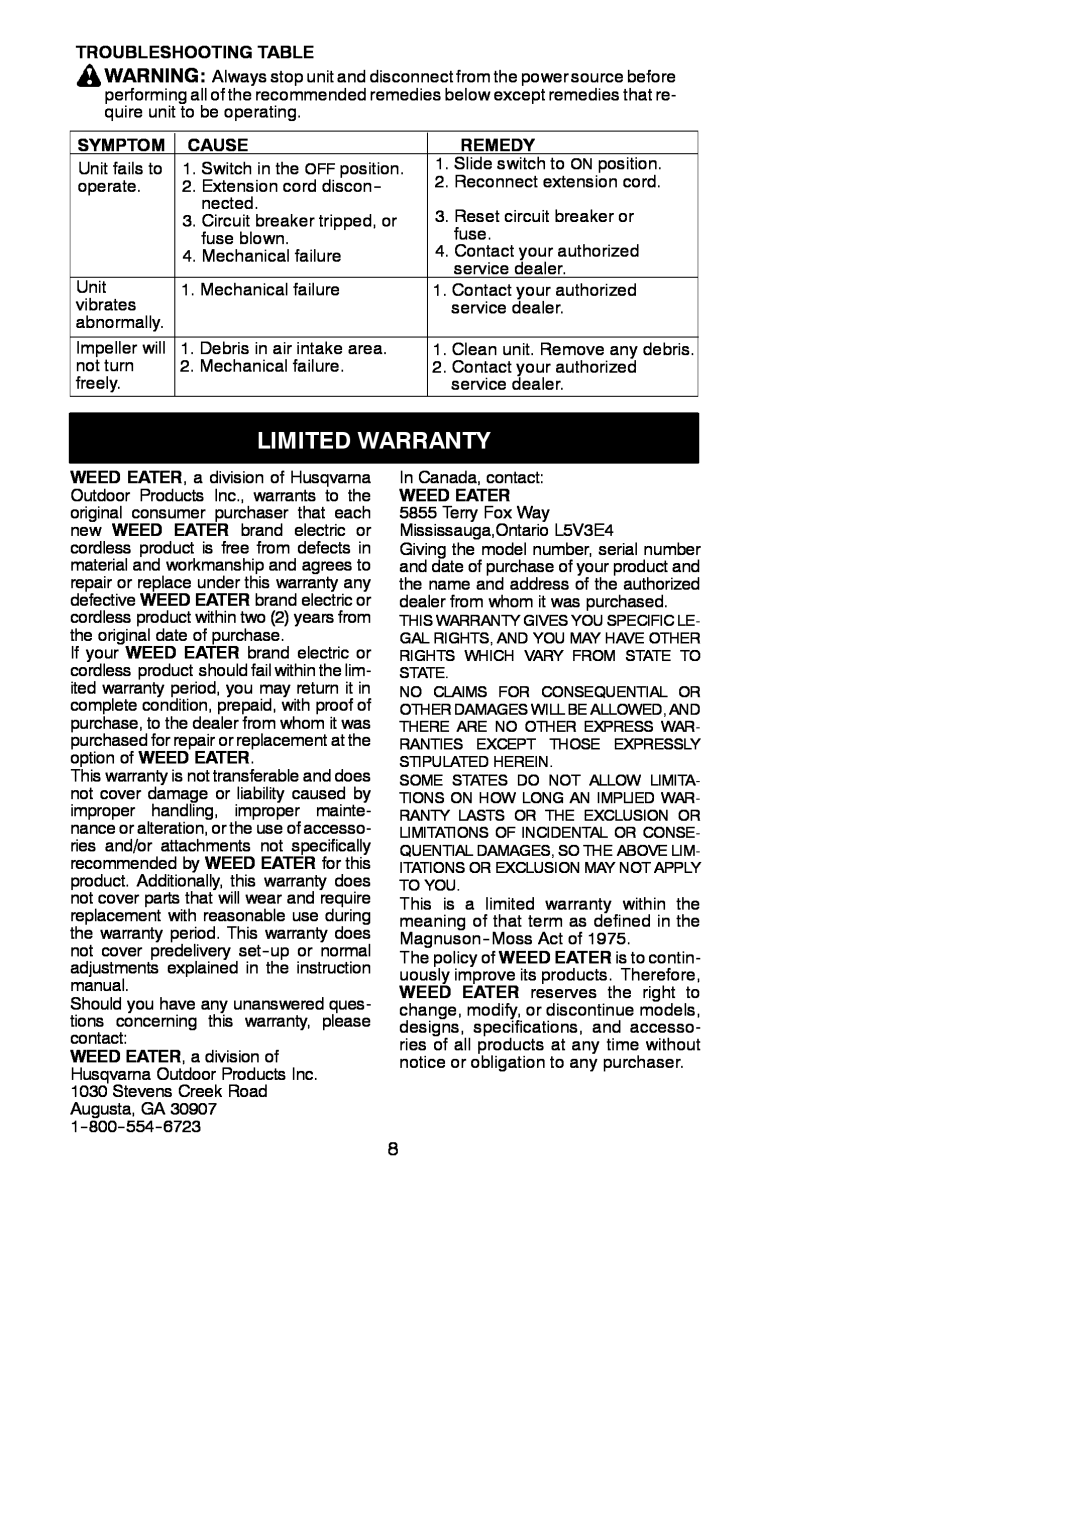 Weed Eater WEB 200, 545186752 instruction manual Limited Warranty, Troubleshooting Table, Symptom, Cause, Remedy, Weed Eater 